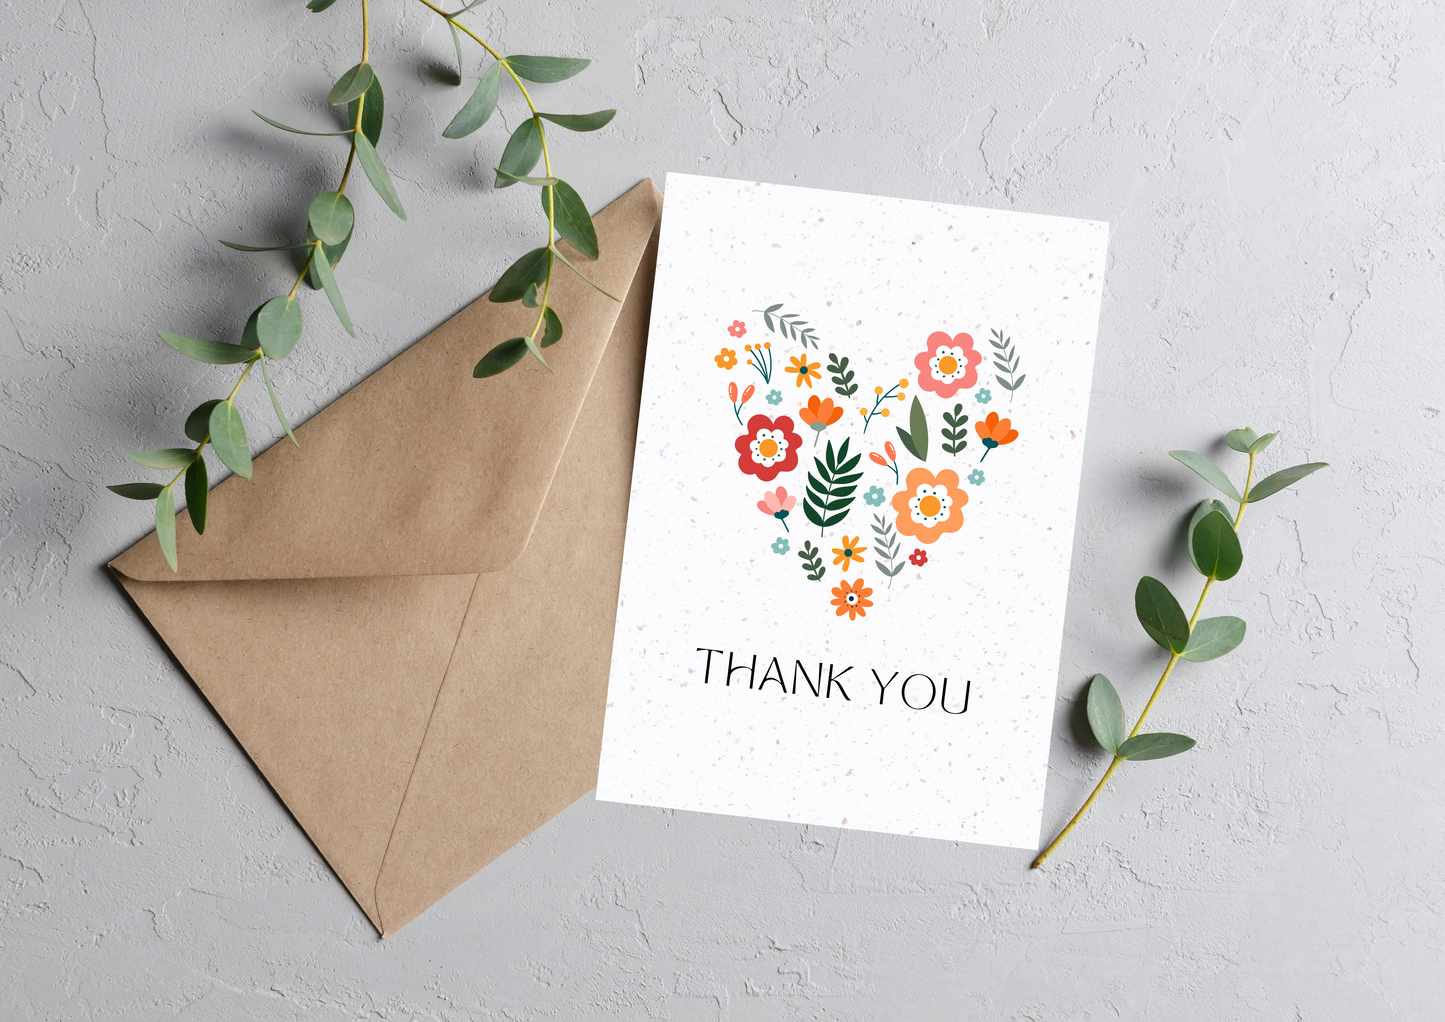 Thank You 3 - Personalized Seed Paper Greeting Card